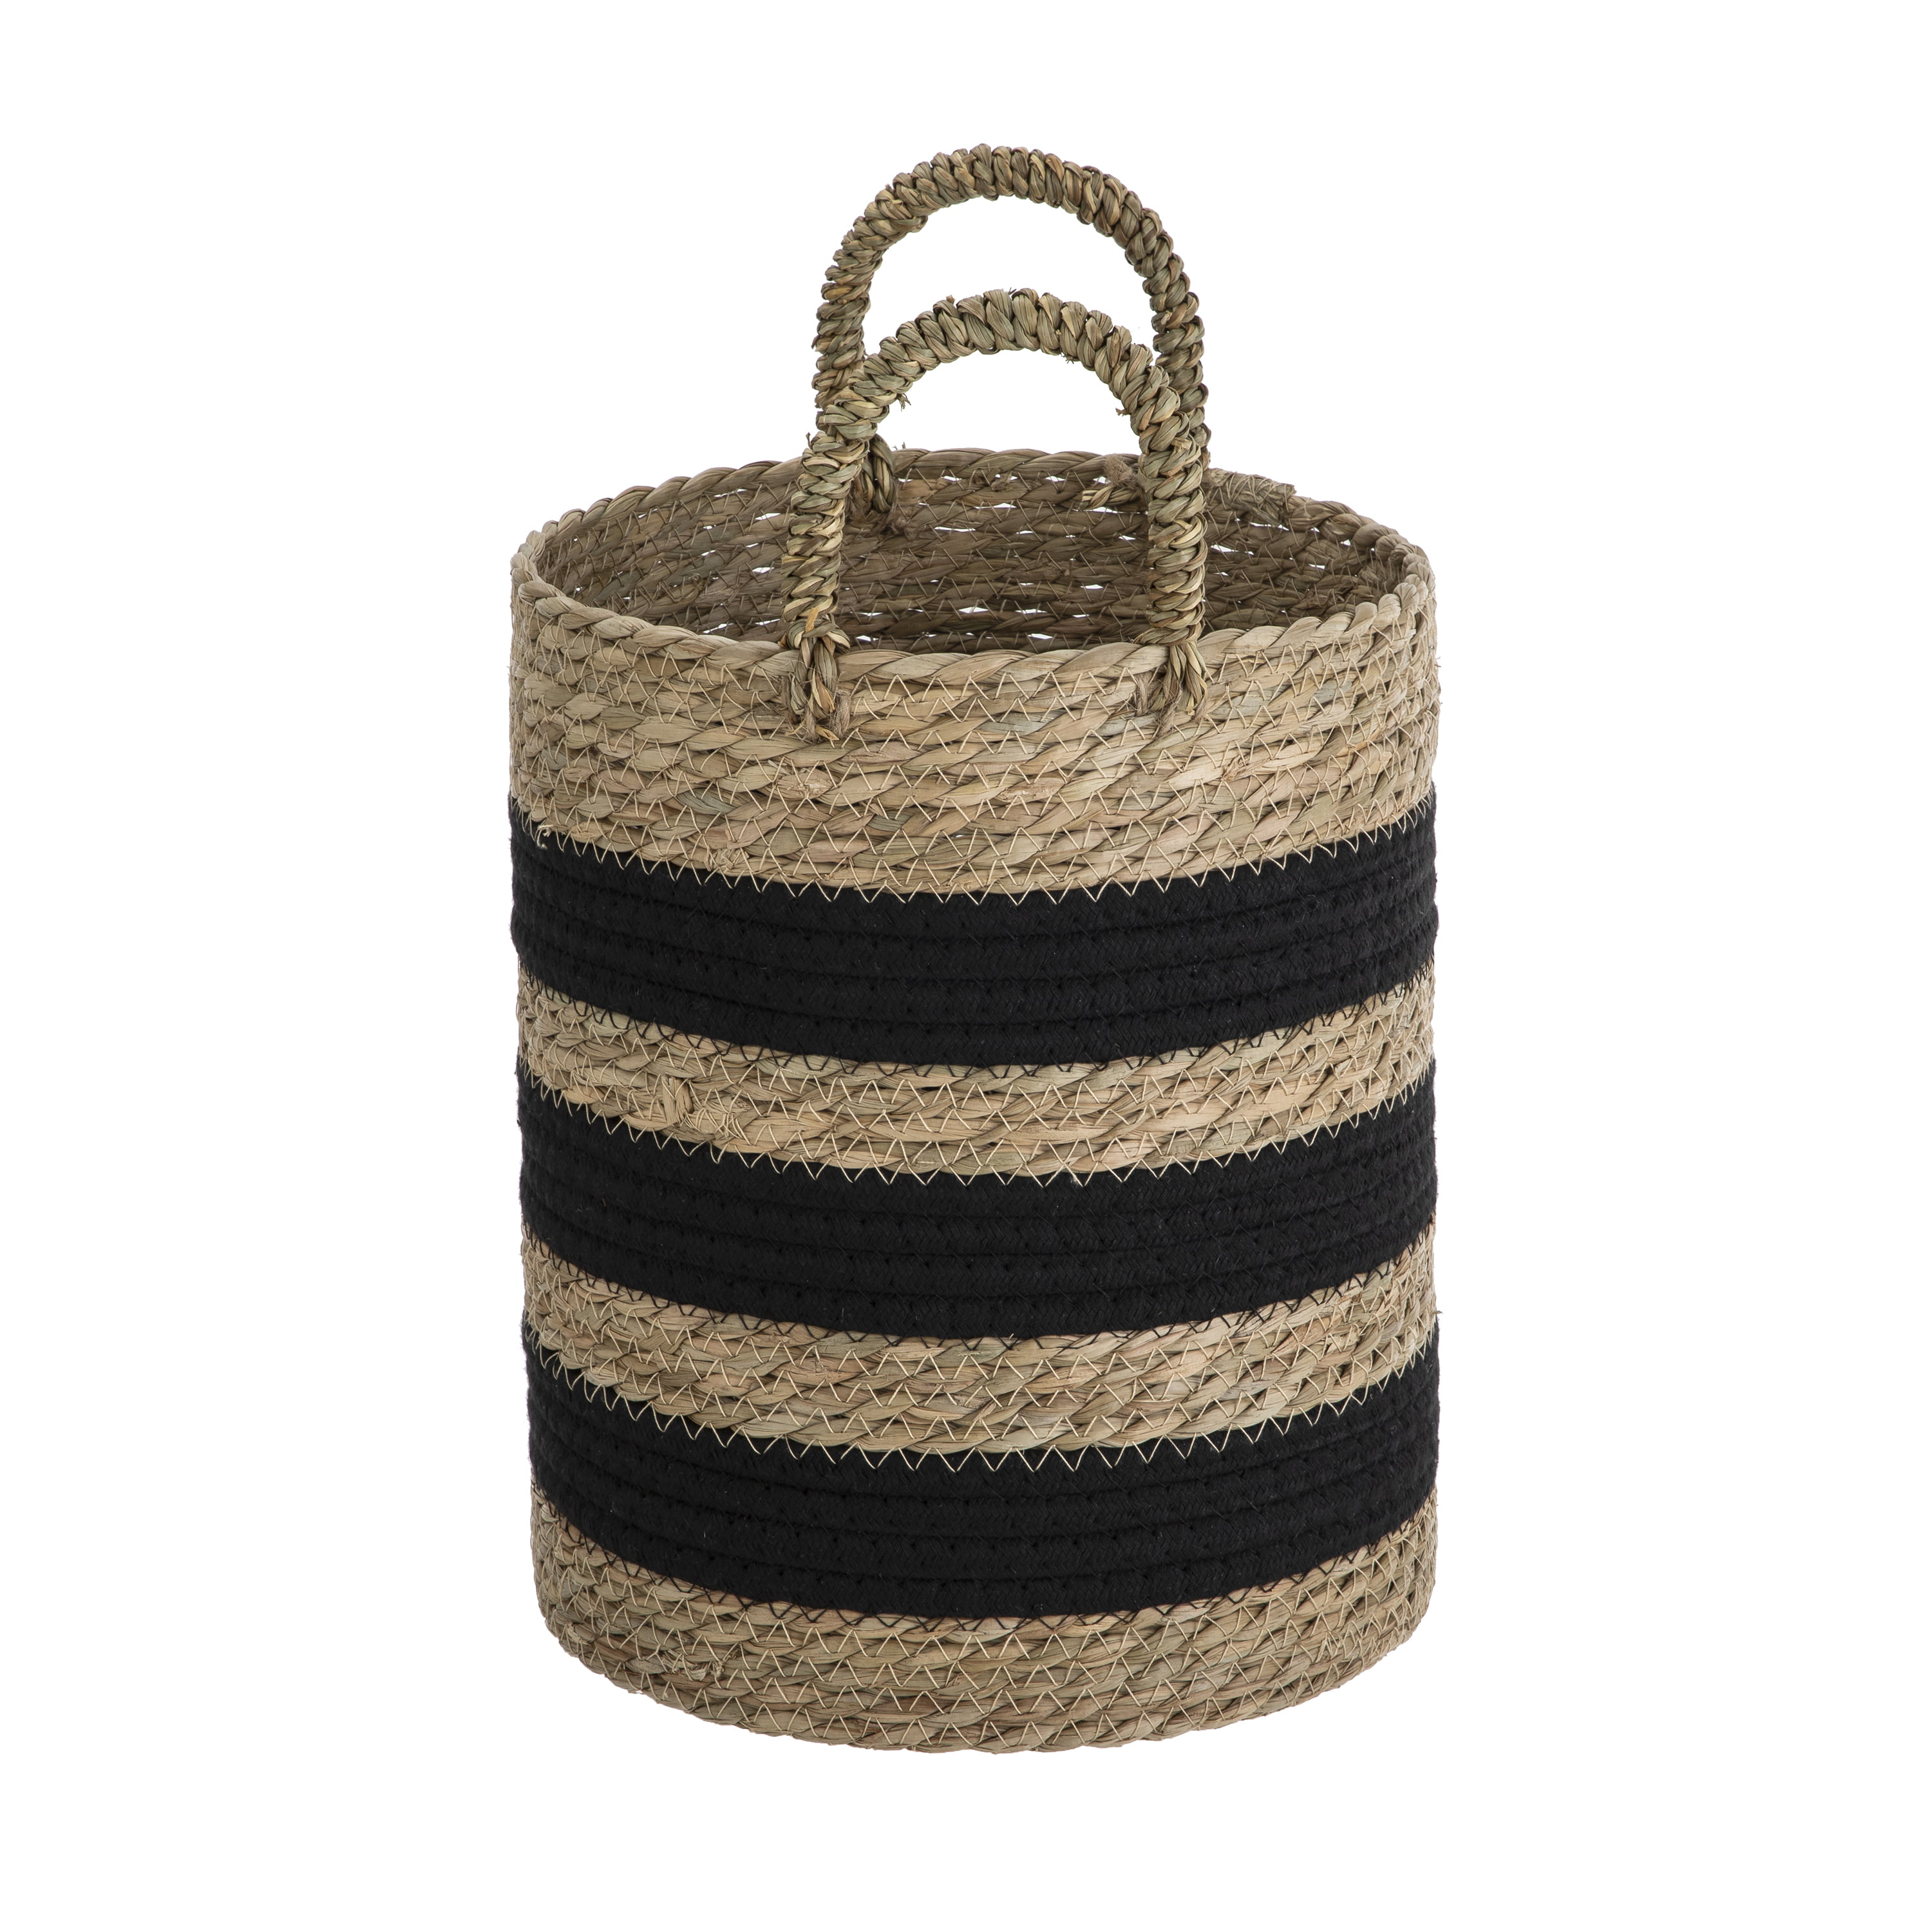 Mainstays Natural and Black Rush Decorative Storage Basket with Handles, 11.4", Round